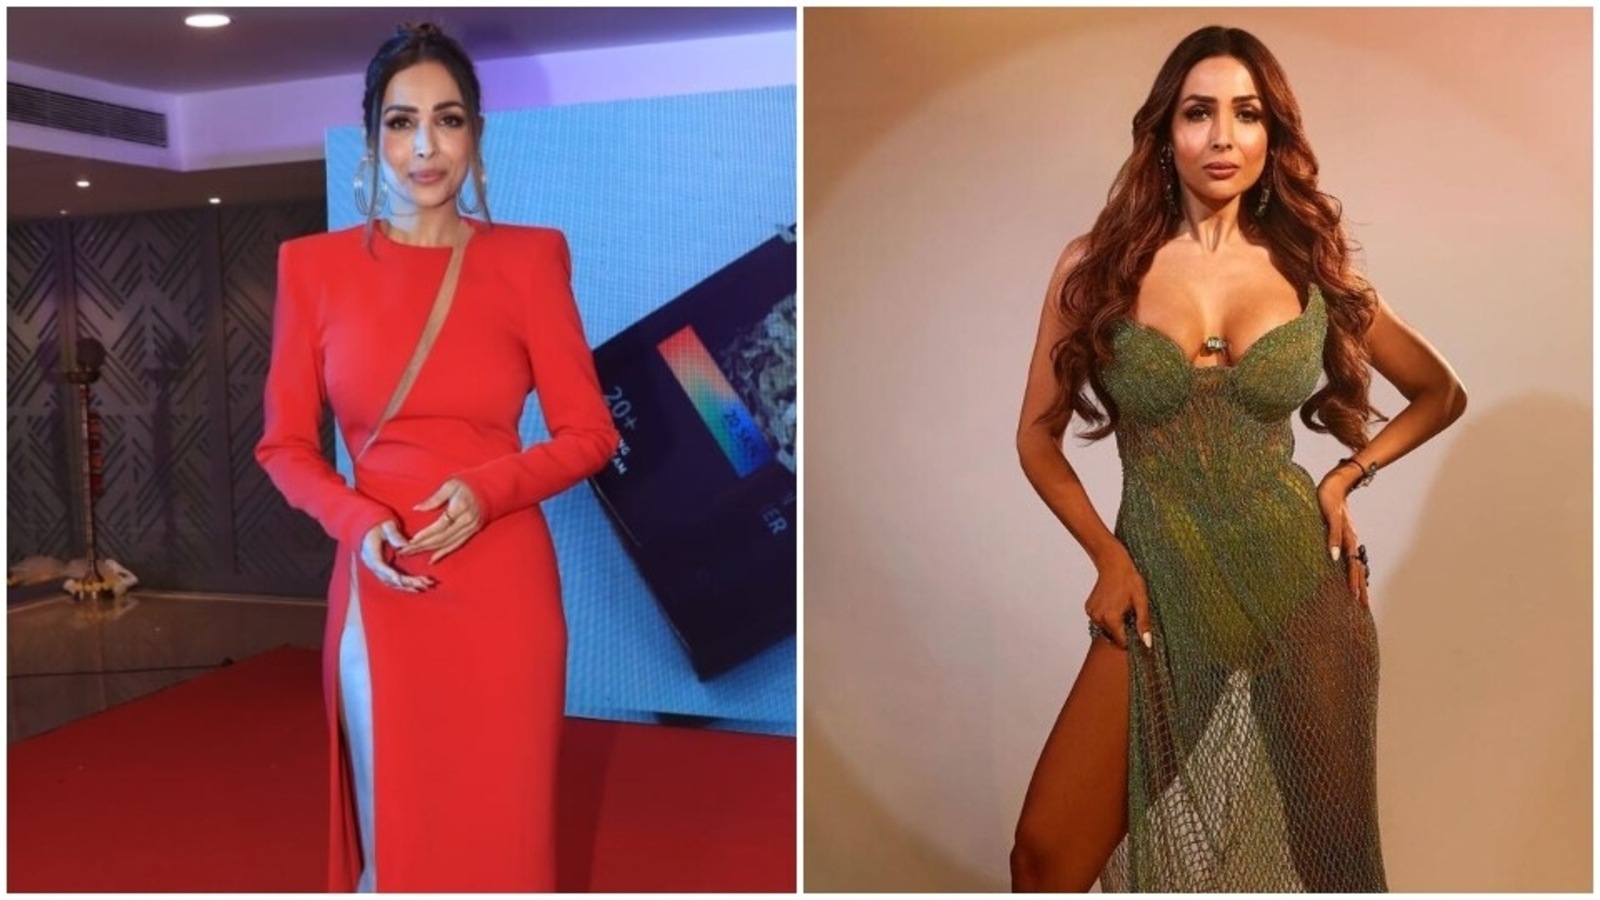 Malaika Arora aces risqué thigh-slit trend in sultry red gown from event and sheer green dress from Aap Jaisa Koi video